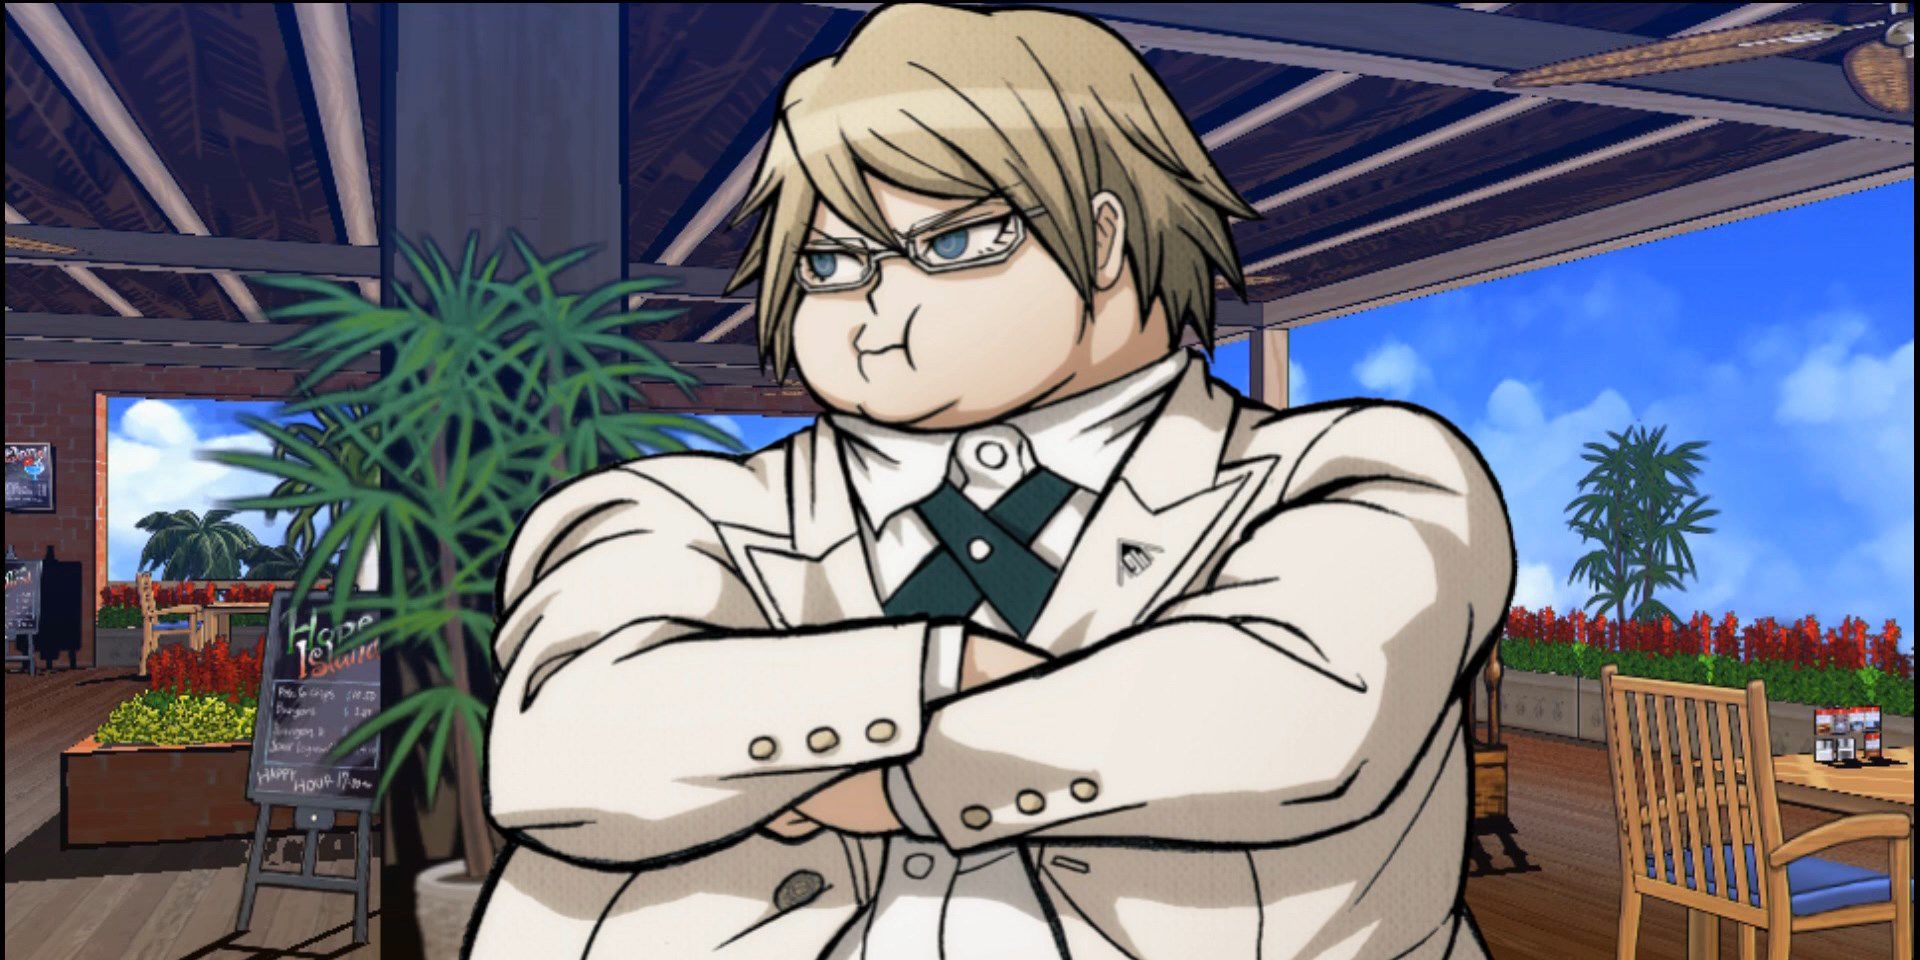 The Ultimate Imposter as Byakuya Togami